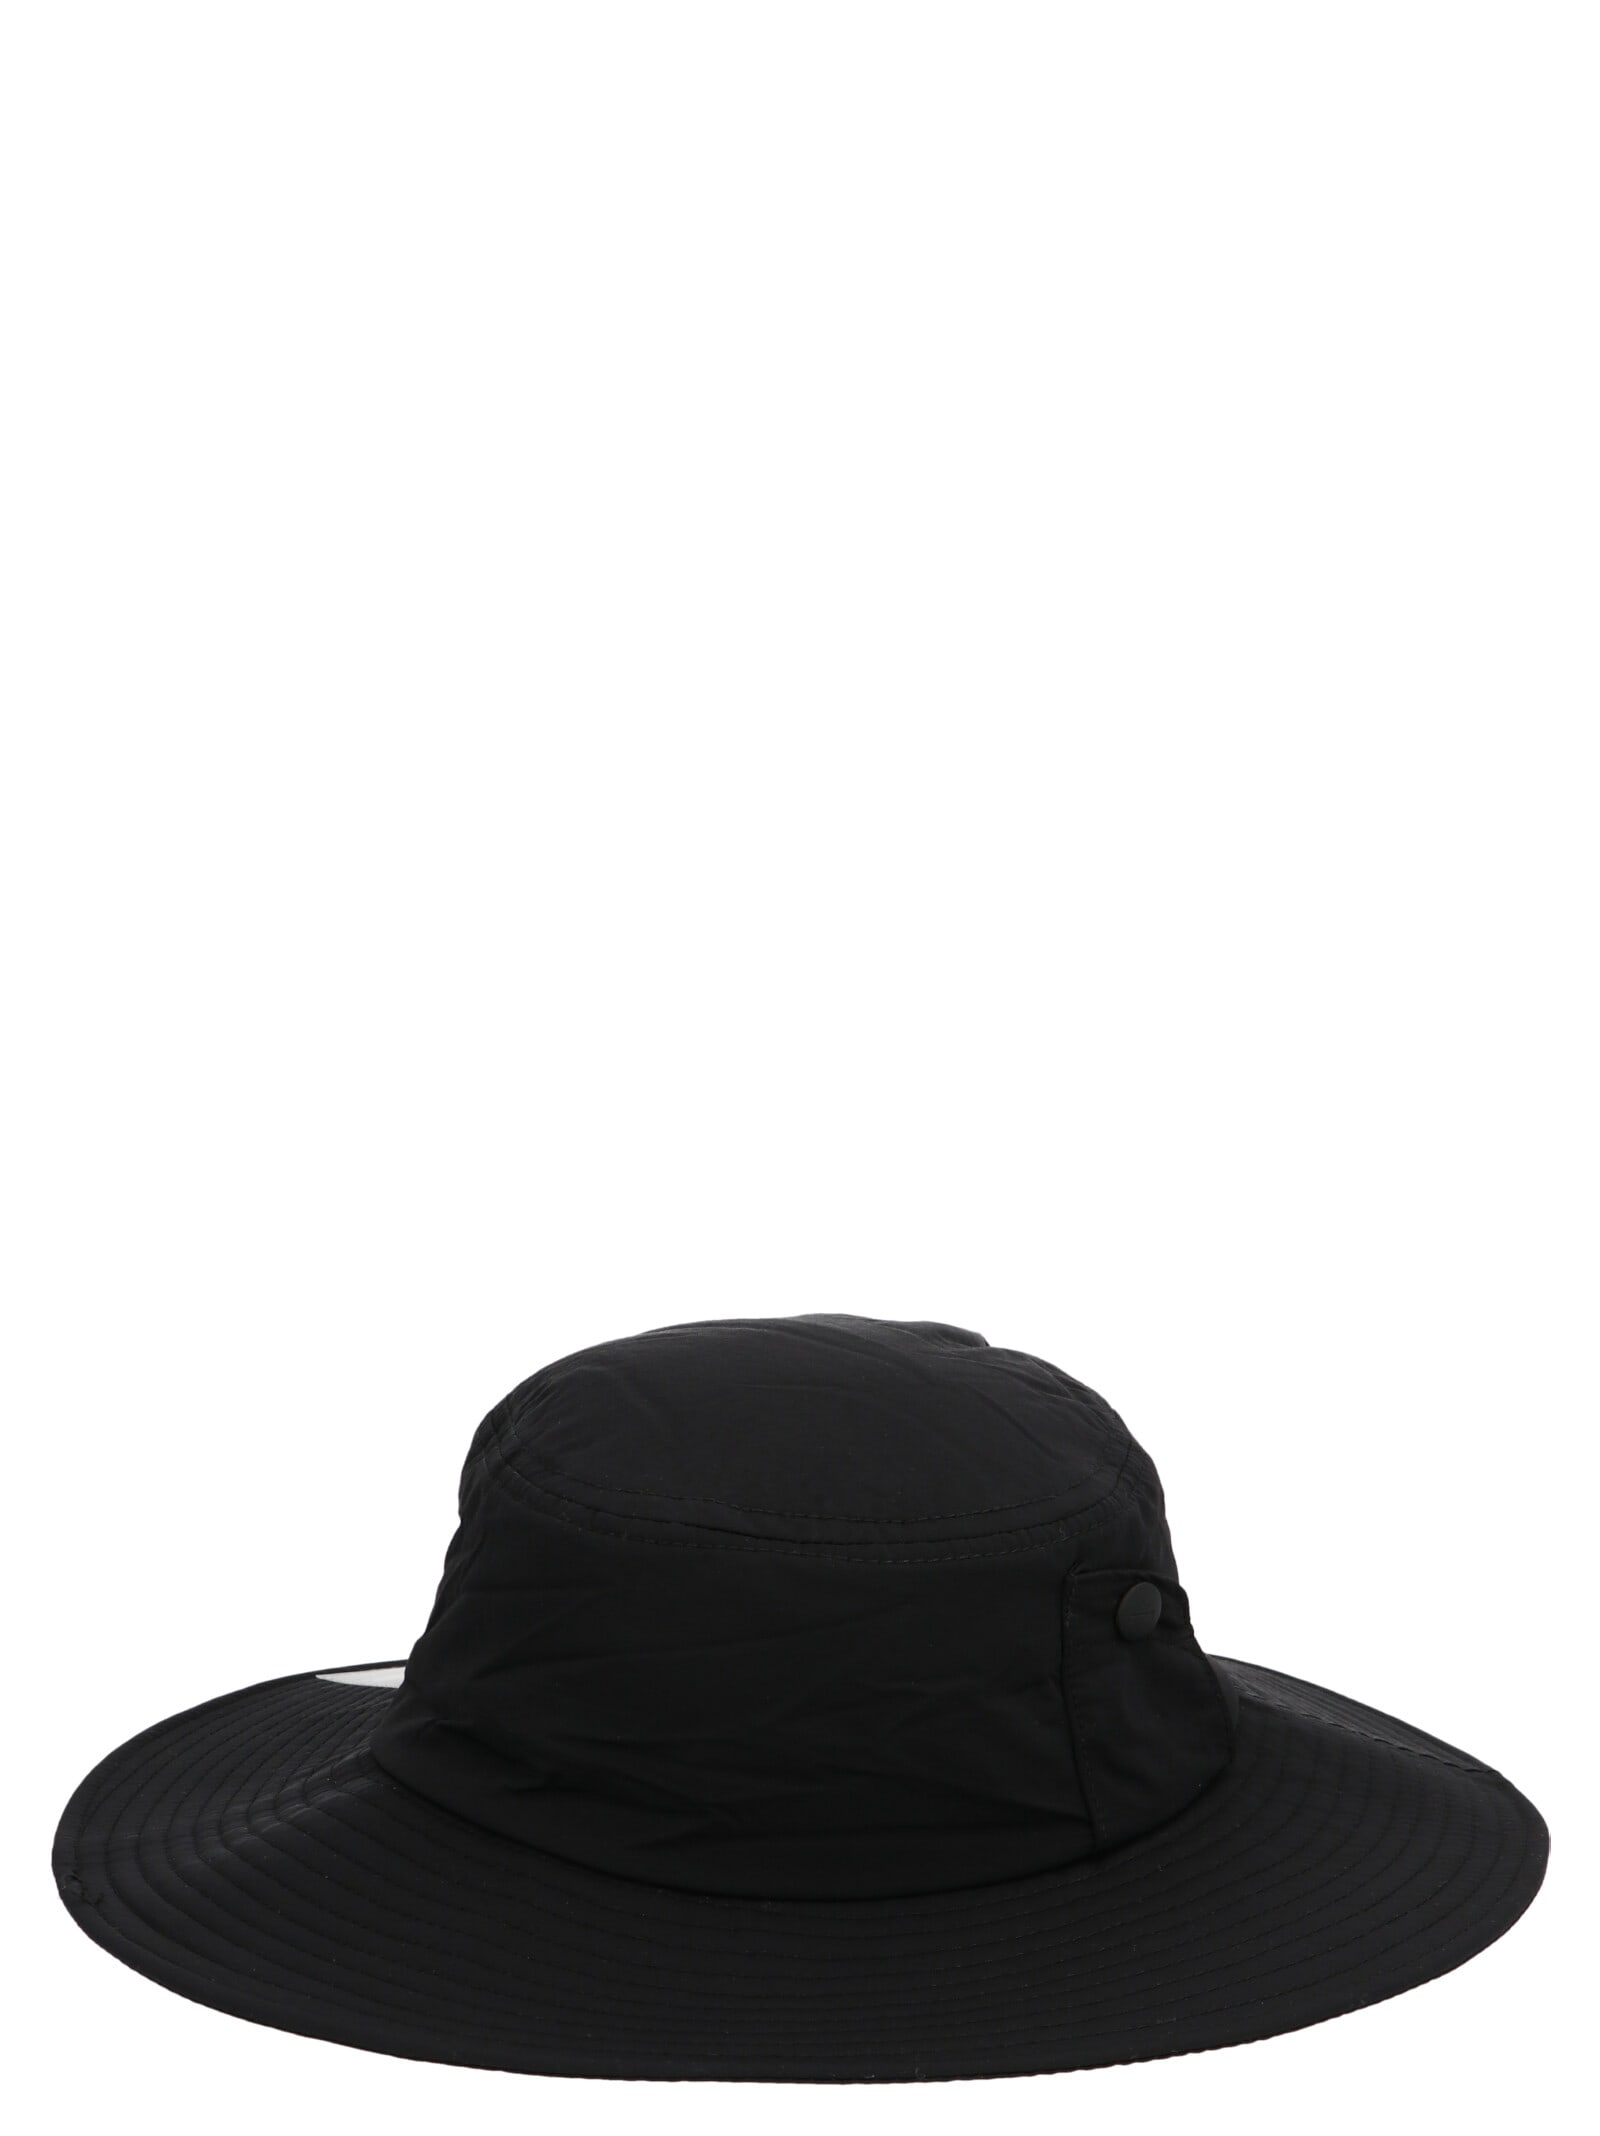 A-COLD-WALL* A-COLD-WALL BUCKET HAT,11285080